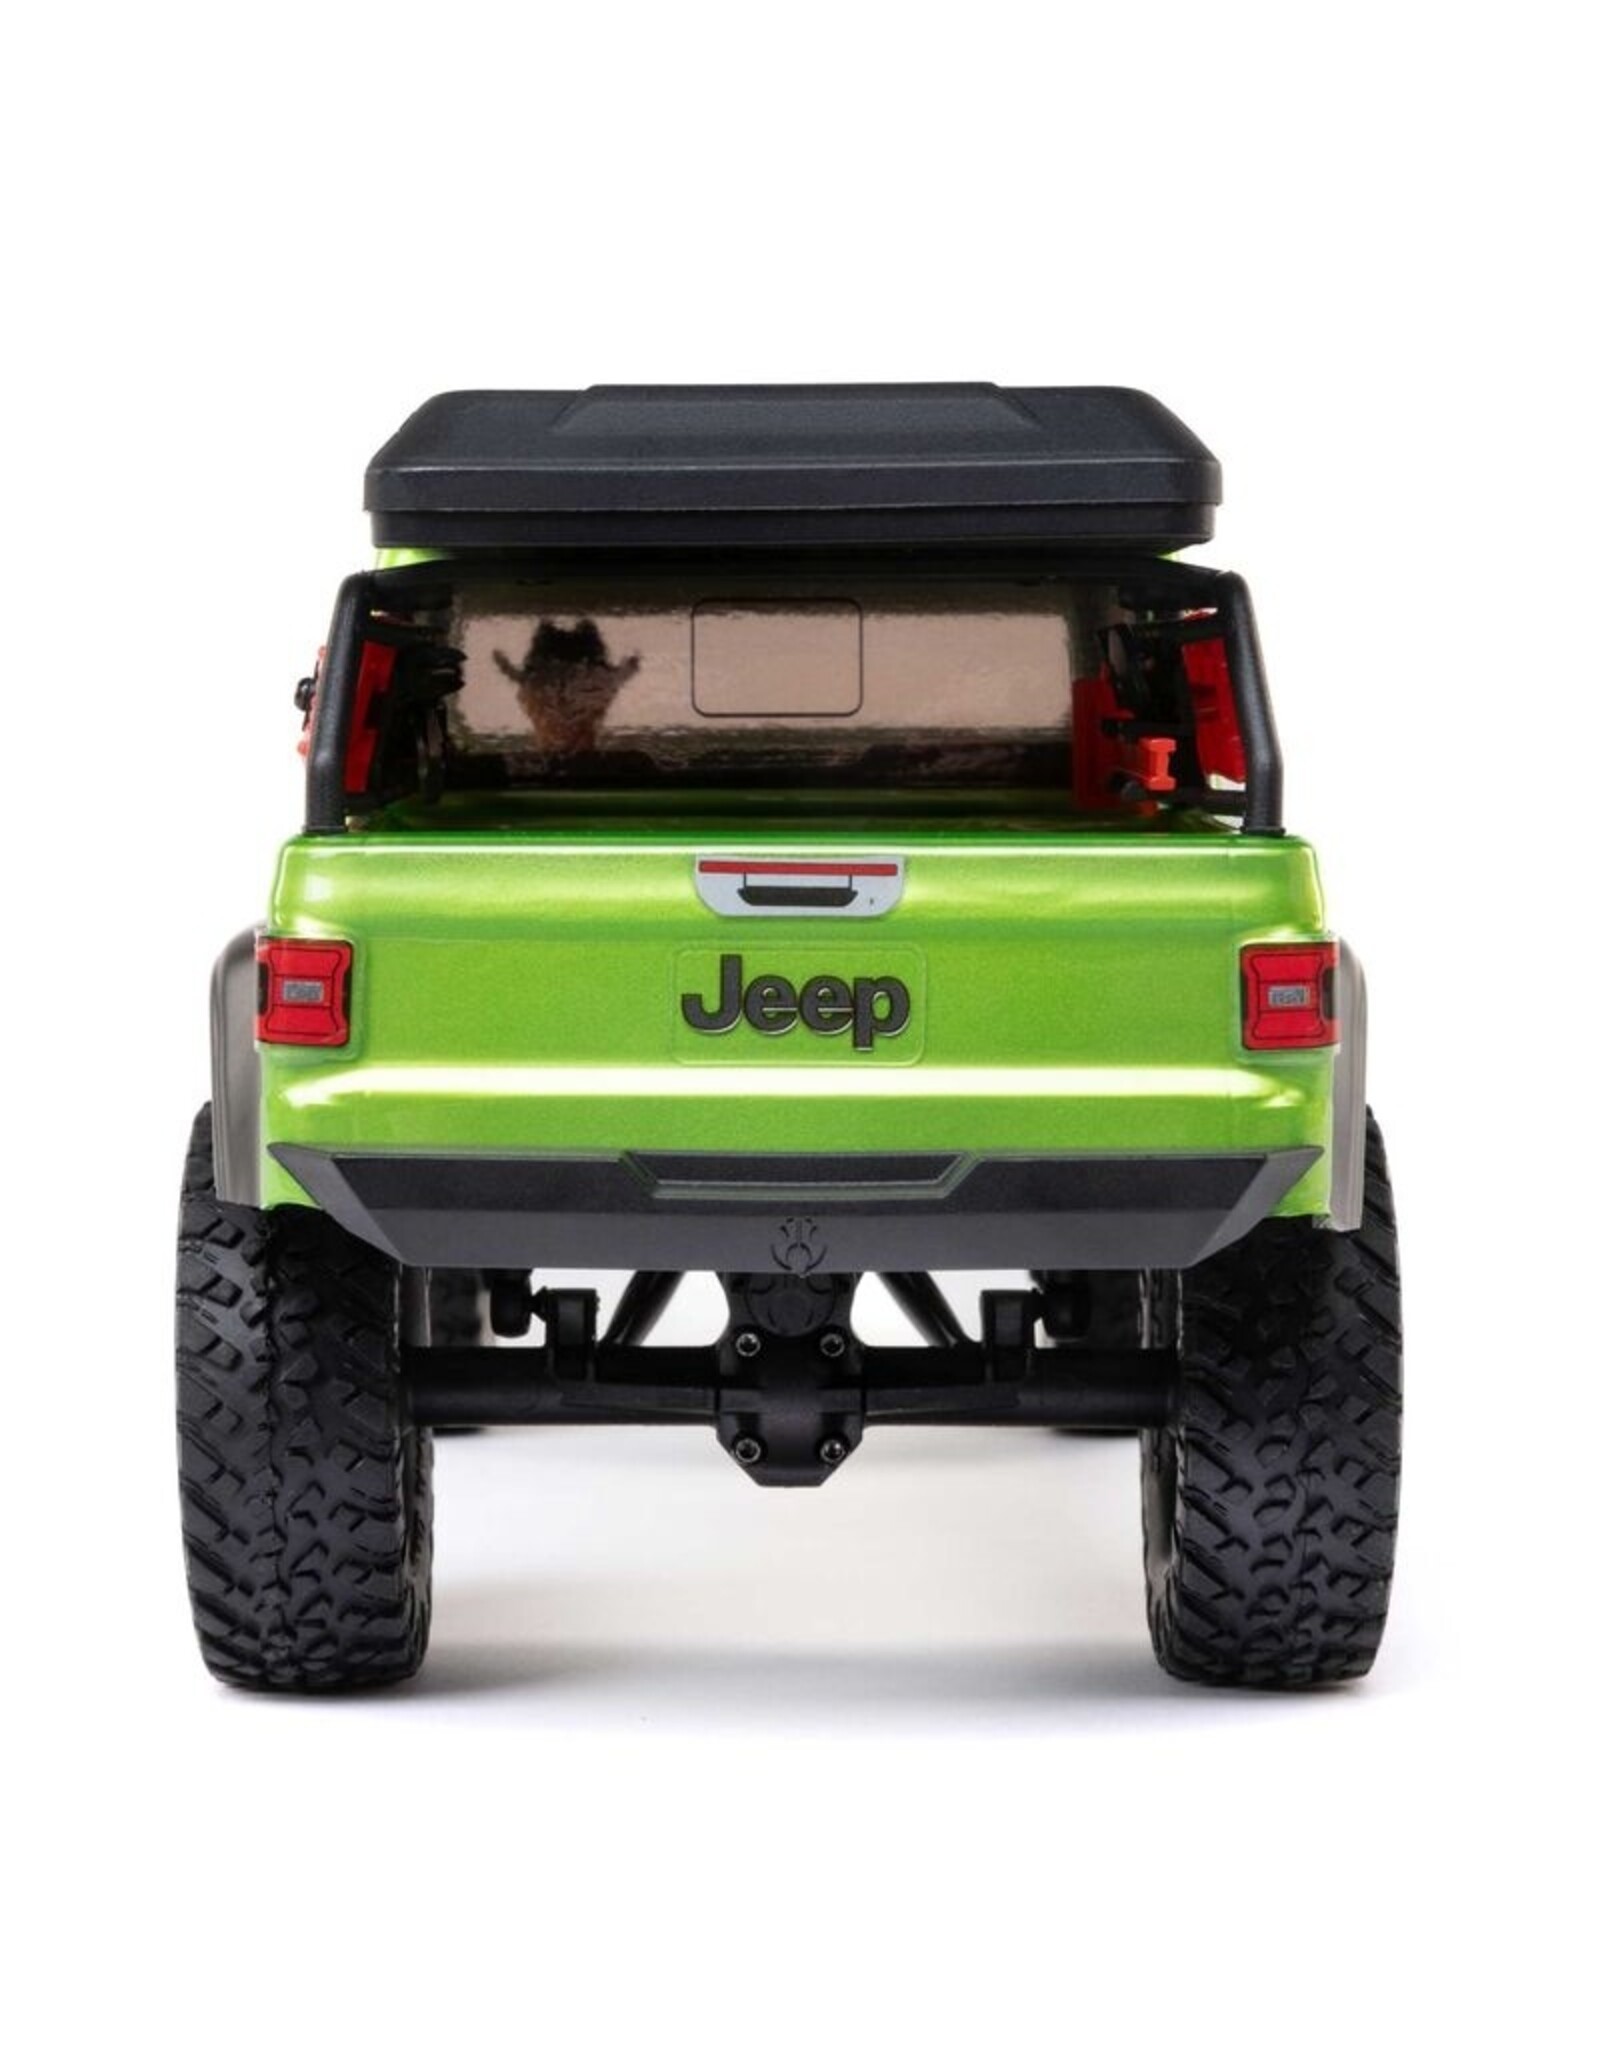 Axial AXI00005V2T3 SCX24 Jeep Gladiator 4WD Rock Crawler RTR, Green